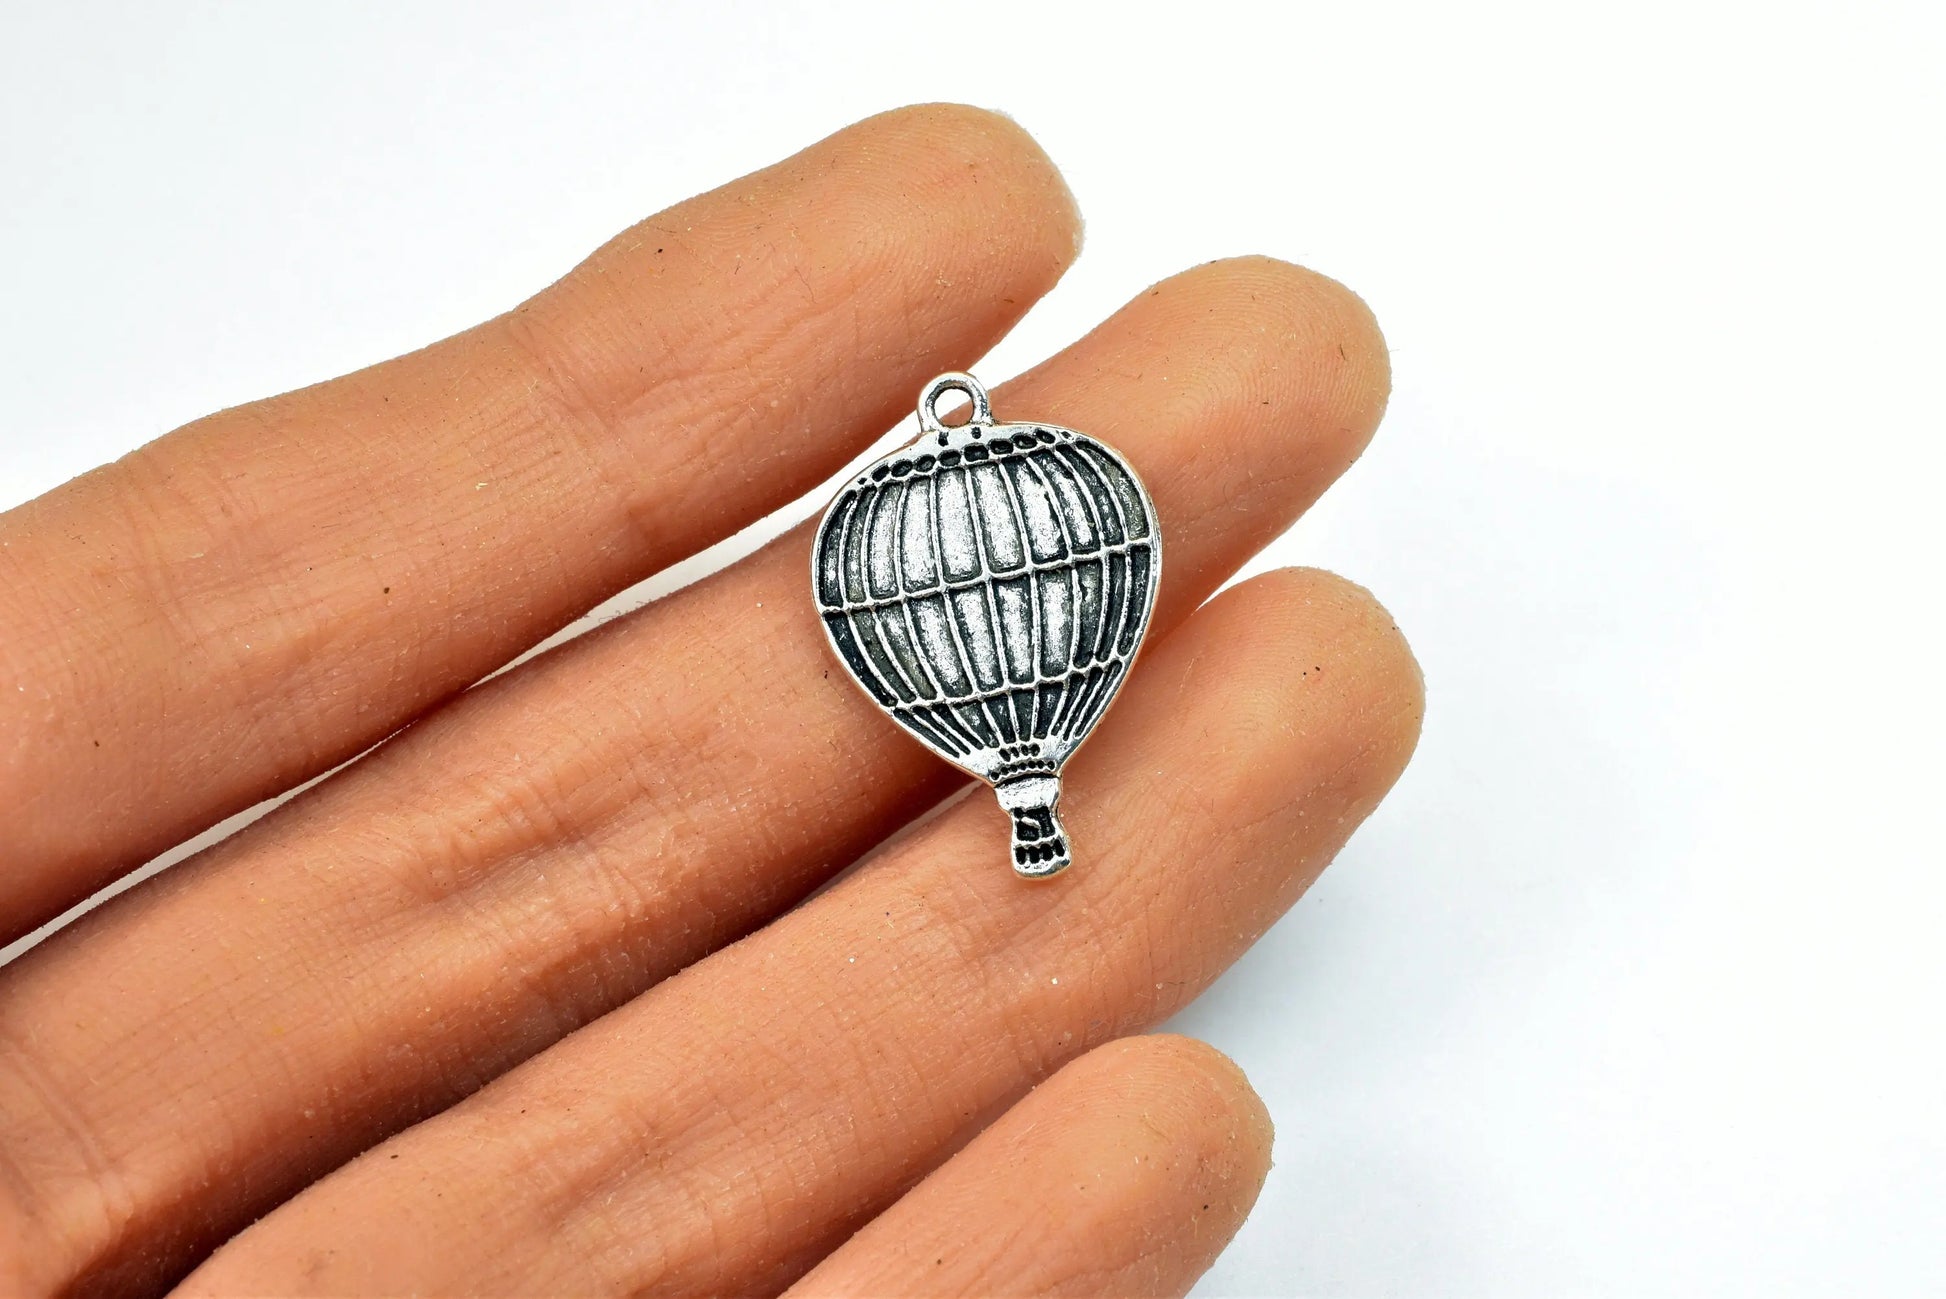 Hot Air Balloon Flight Charm Size 24x16mm Silver Color Balloon Ride Charm Pendant Finding For Jewelry Making 11PCs/PK - BeadsFindingDepot